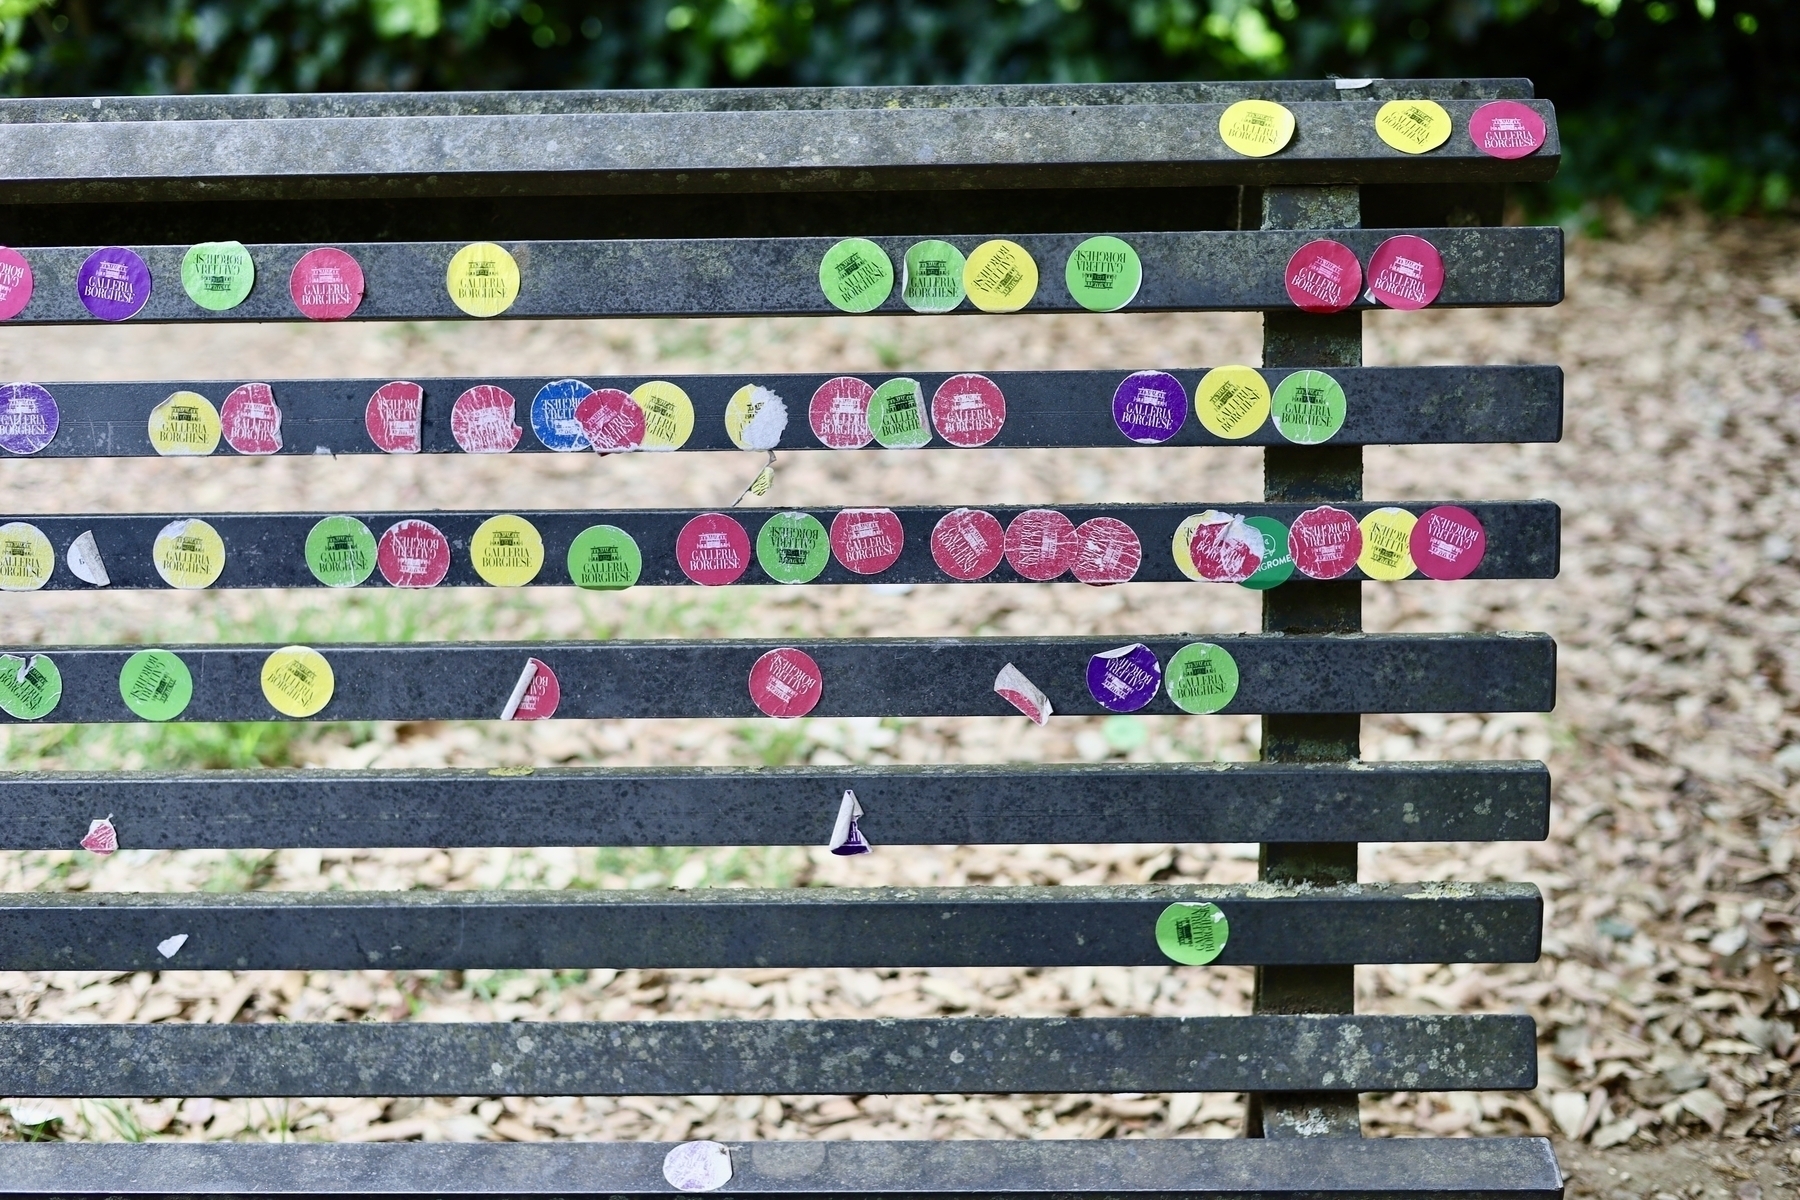 Colorful stickers are scattered across the wooden slats of an outdoor bench.